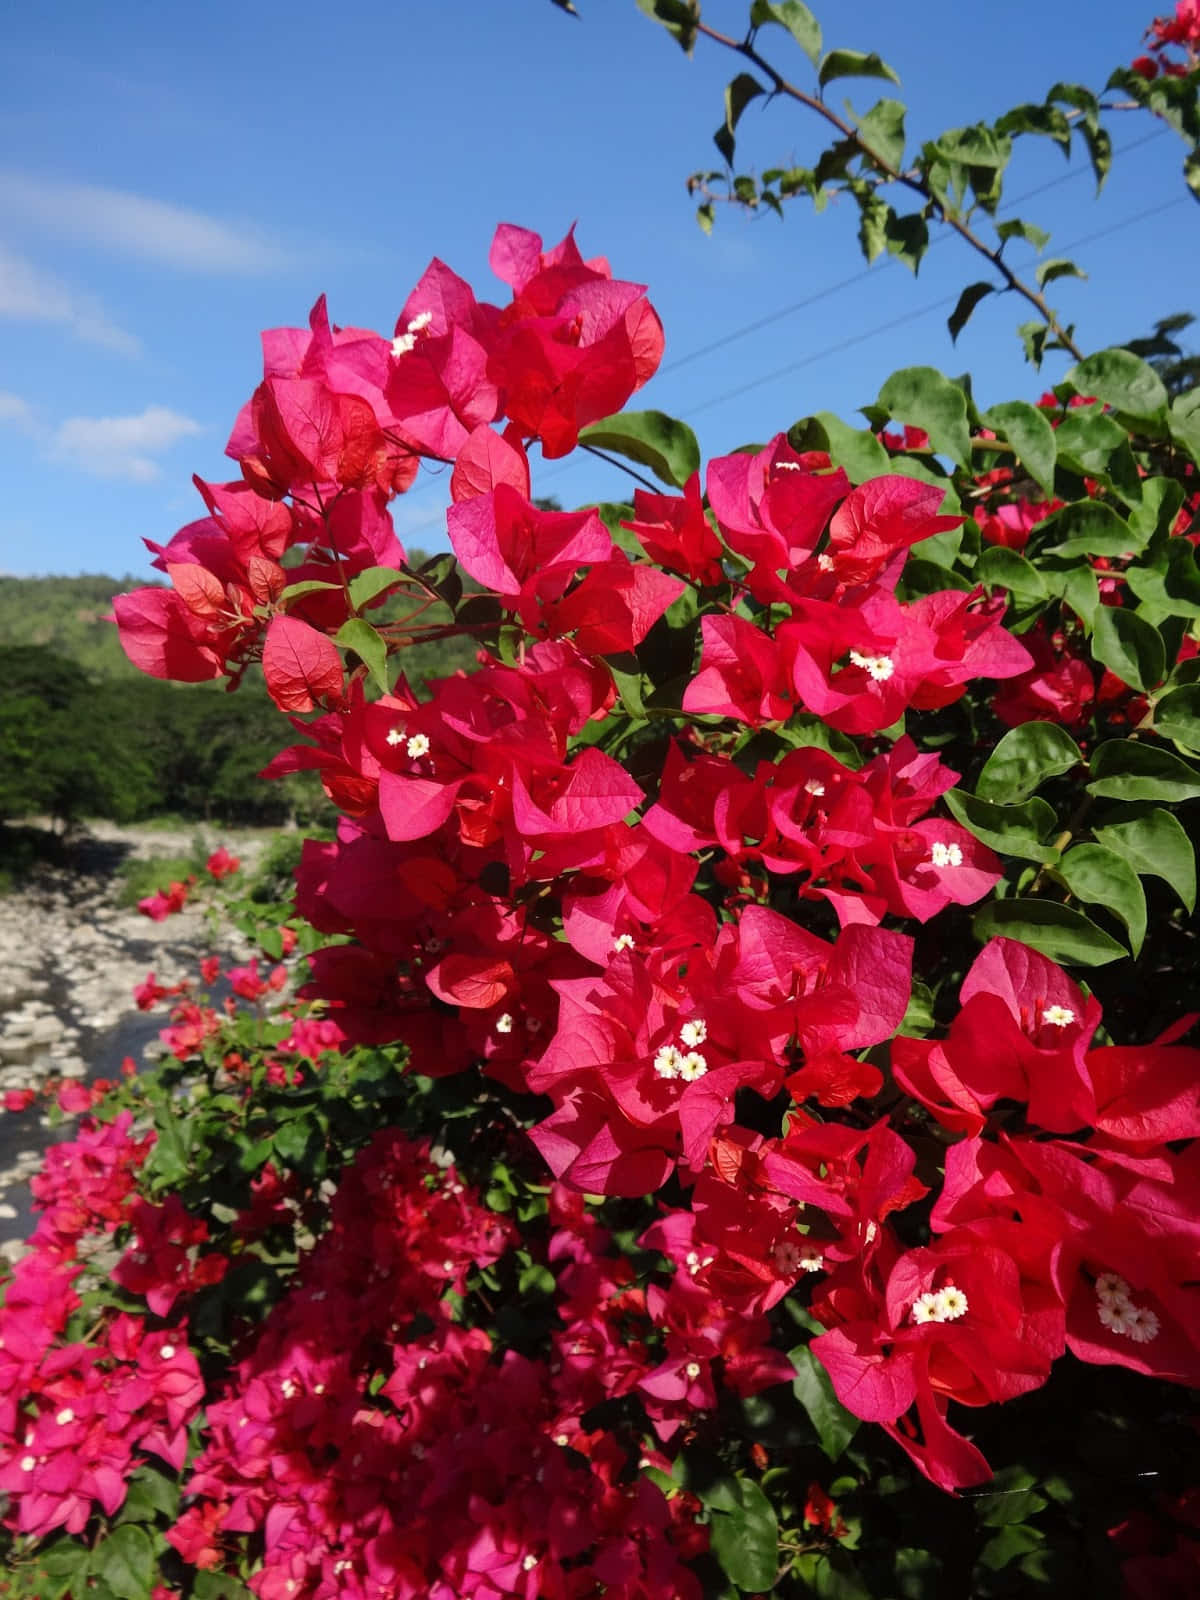 A vibrant and towering purple bougainvillea